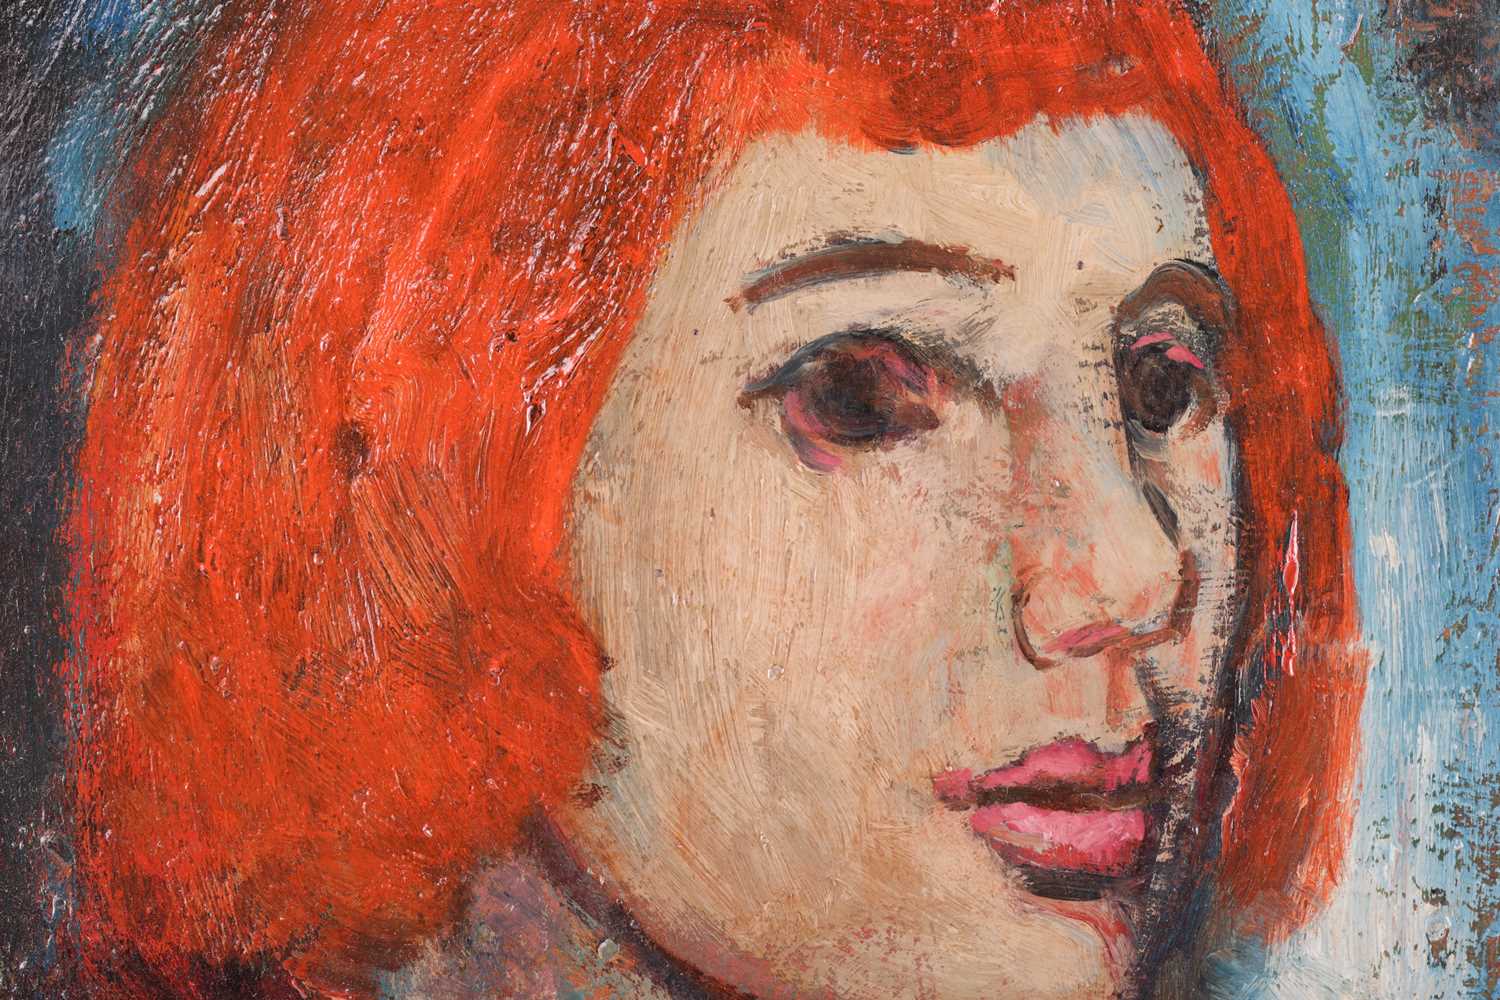 Reg Gammon (1894-1997), 'Girl with Red Hair', signed 'Gammon' (lower left), oil on board, 39 x 27 cm - Image 7 of 8